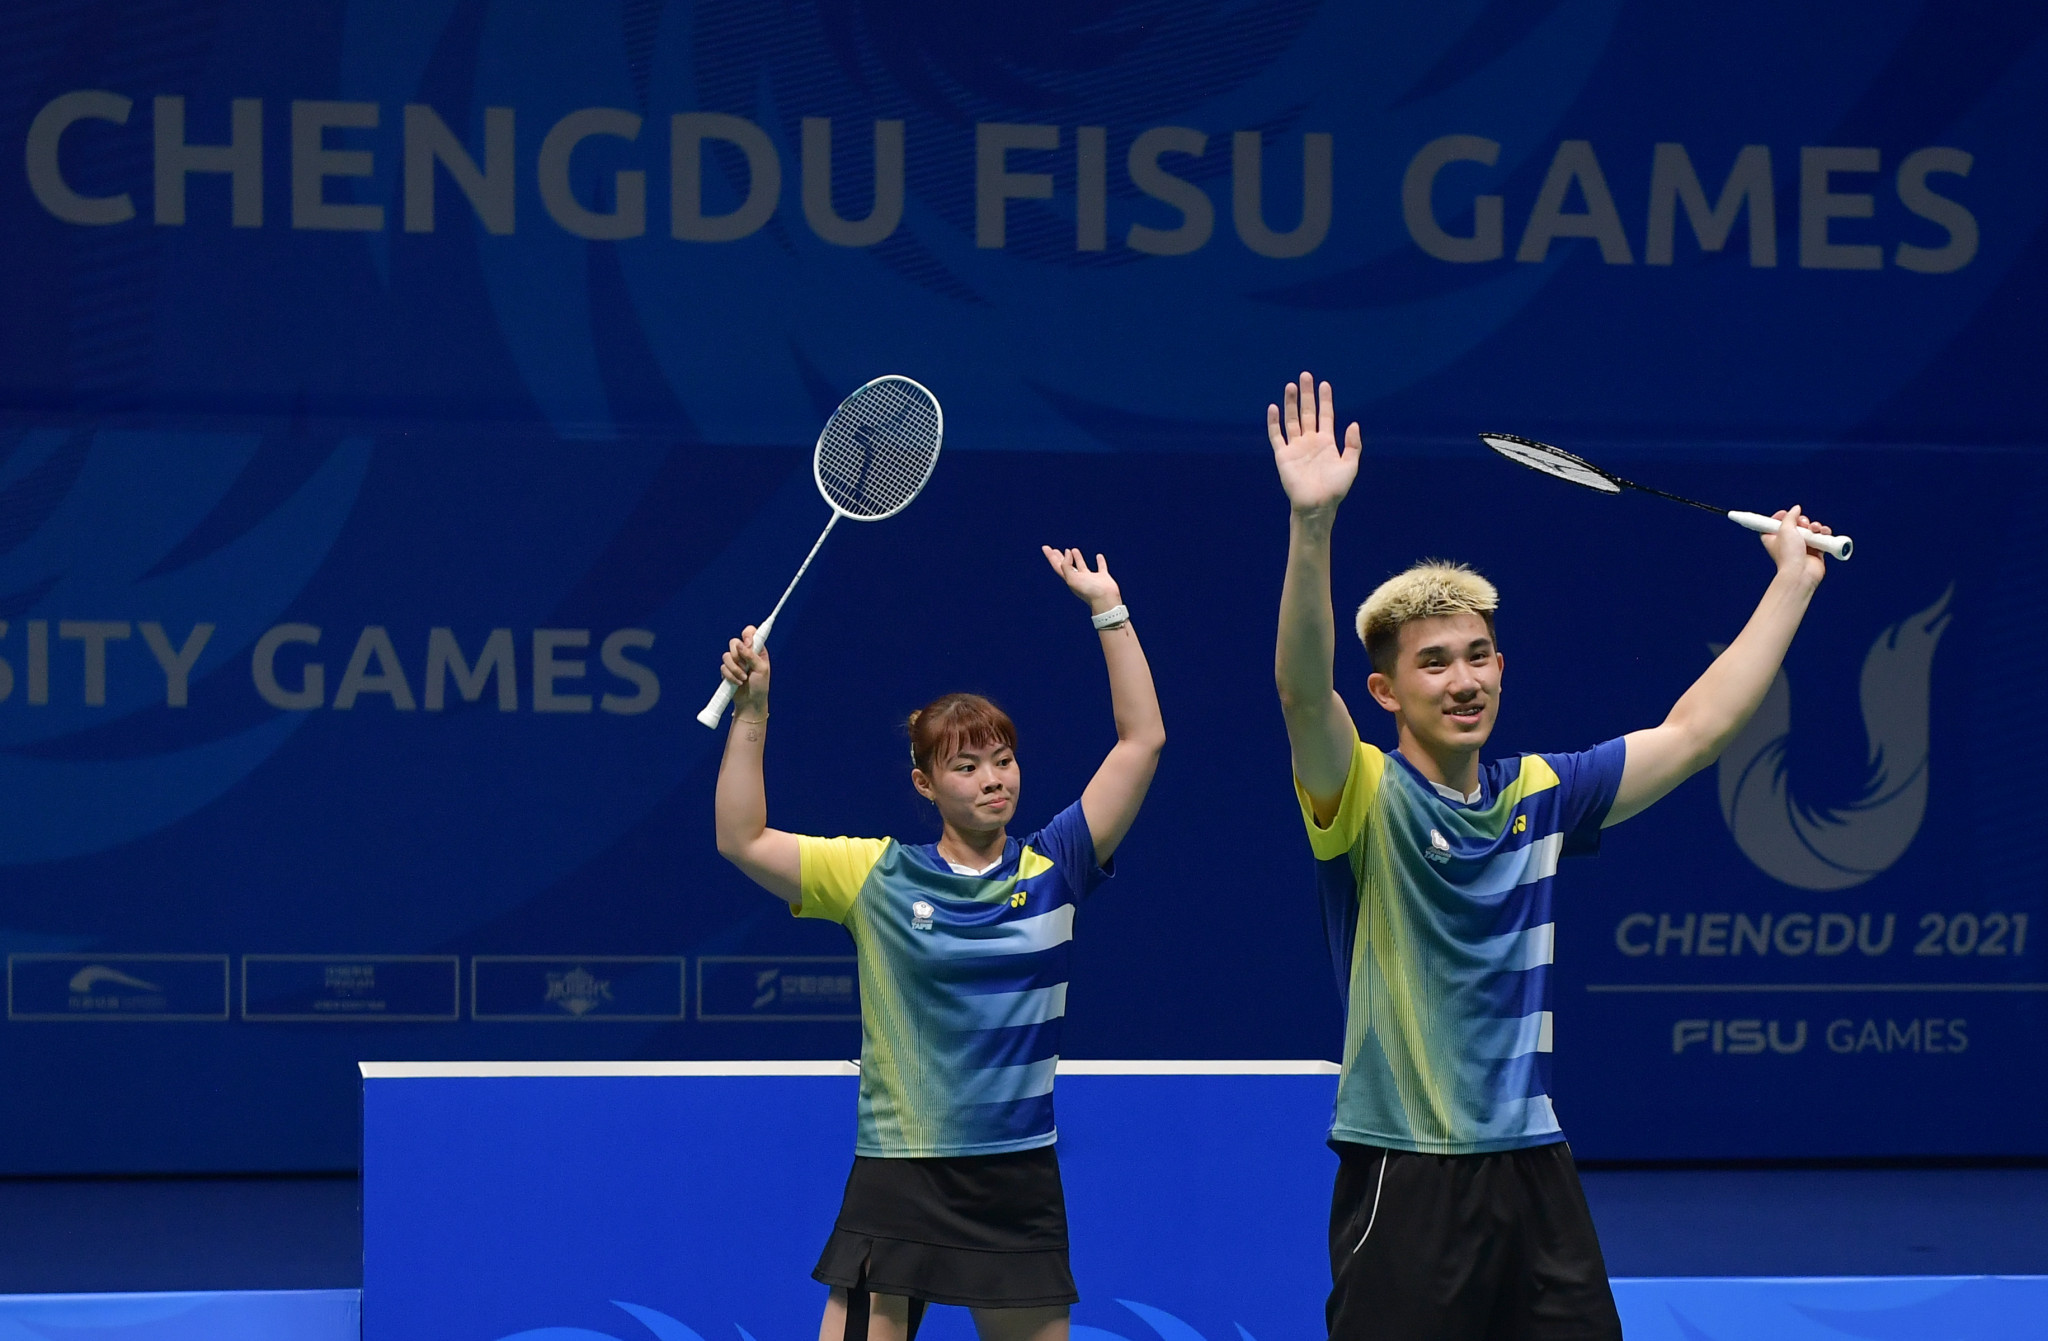 Ye and Lee prevent Chinese gold medal monopoly in Chengdu 2021 badminton